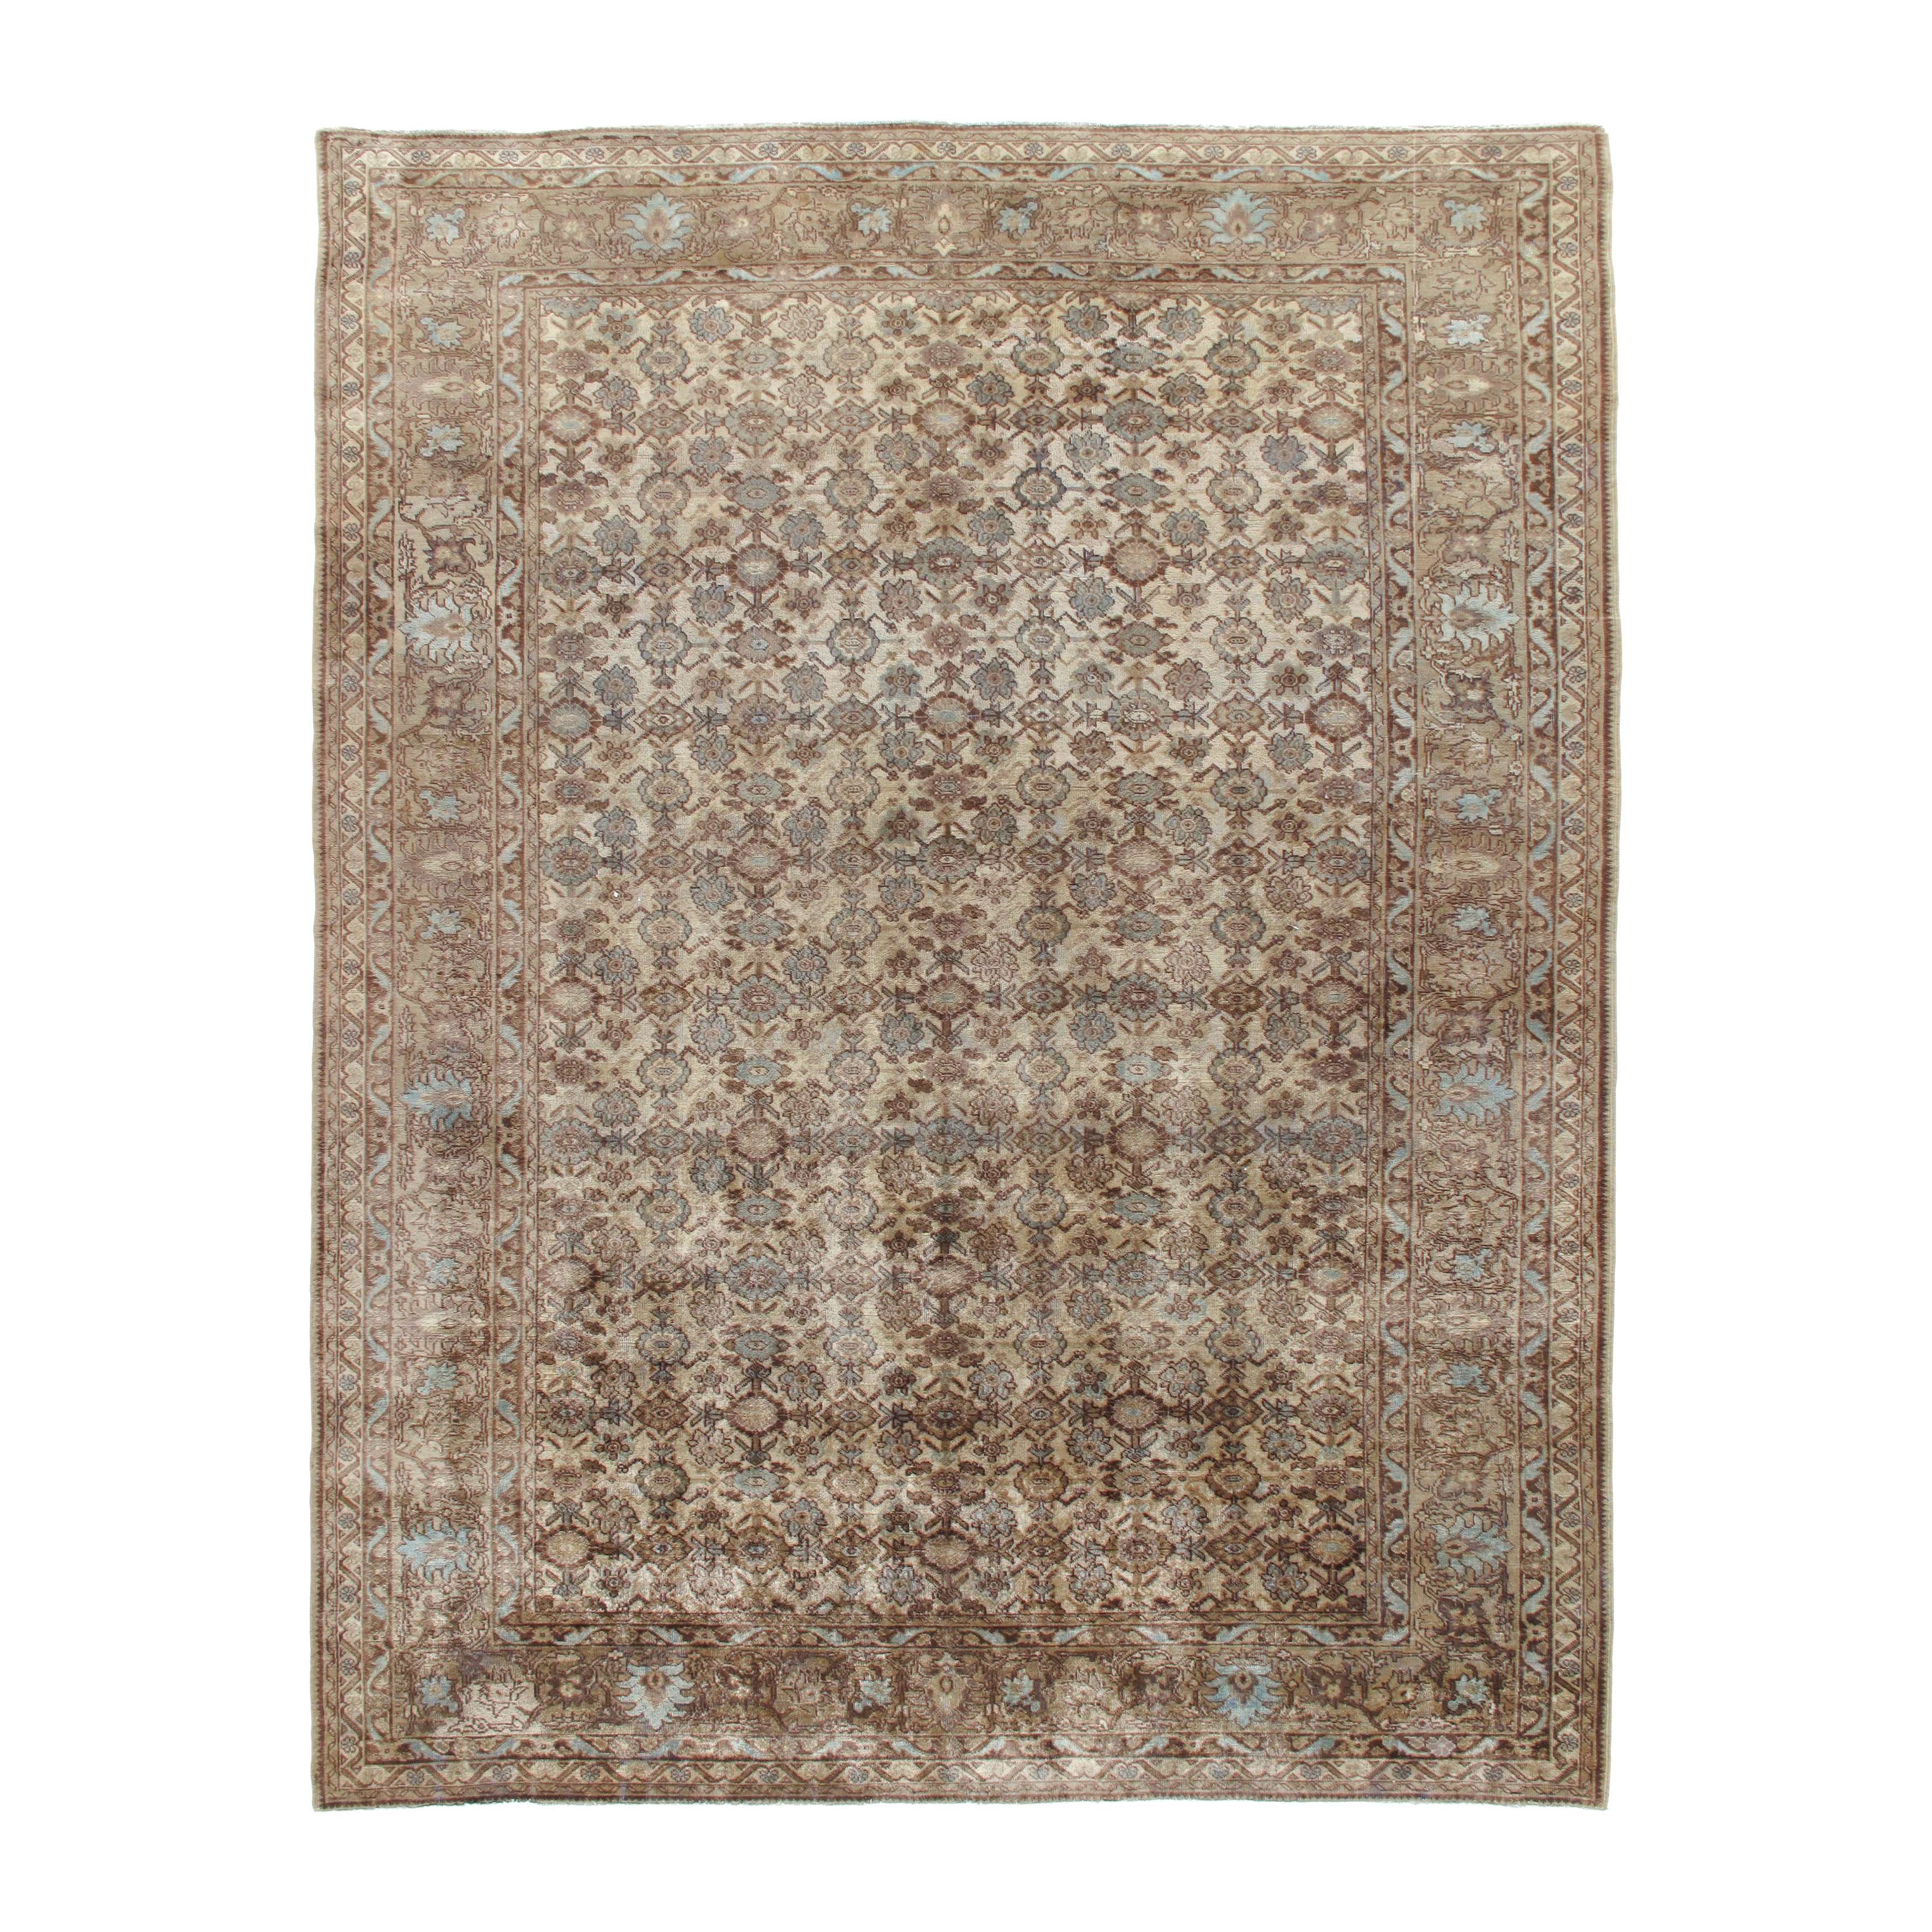 This Herati rug is hand-knotted and made of 100% wool.  